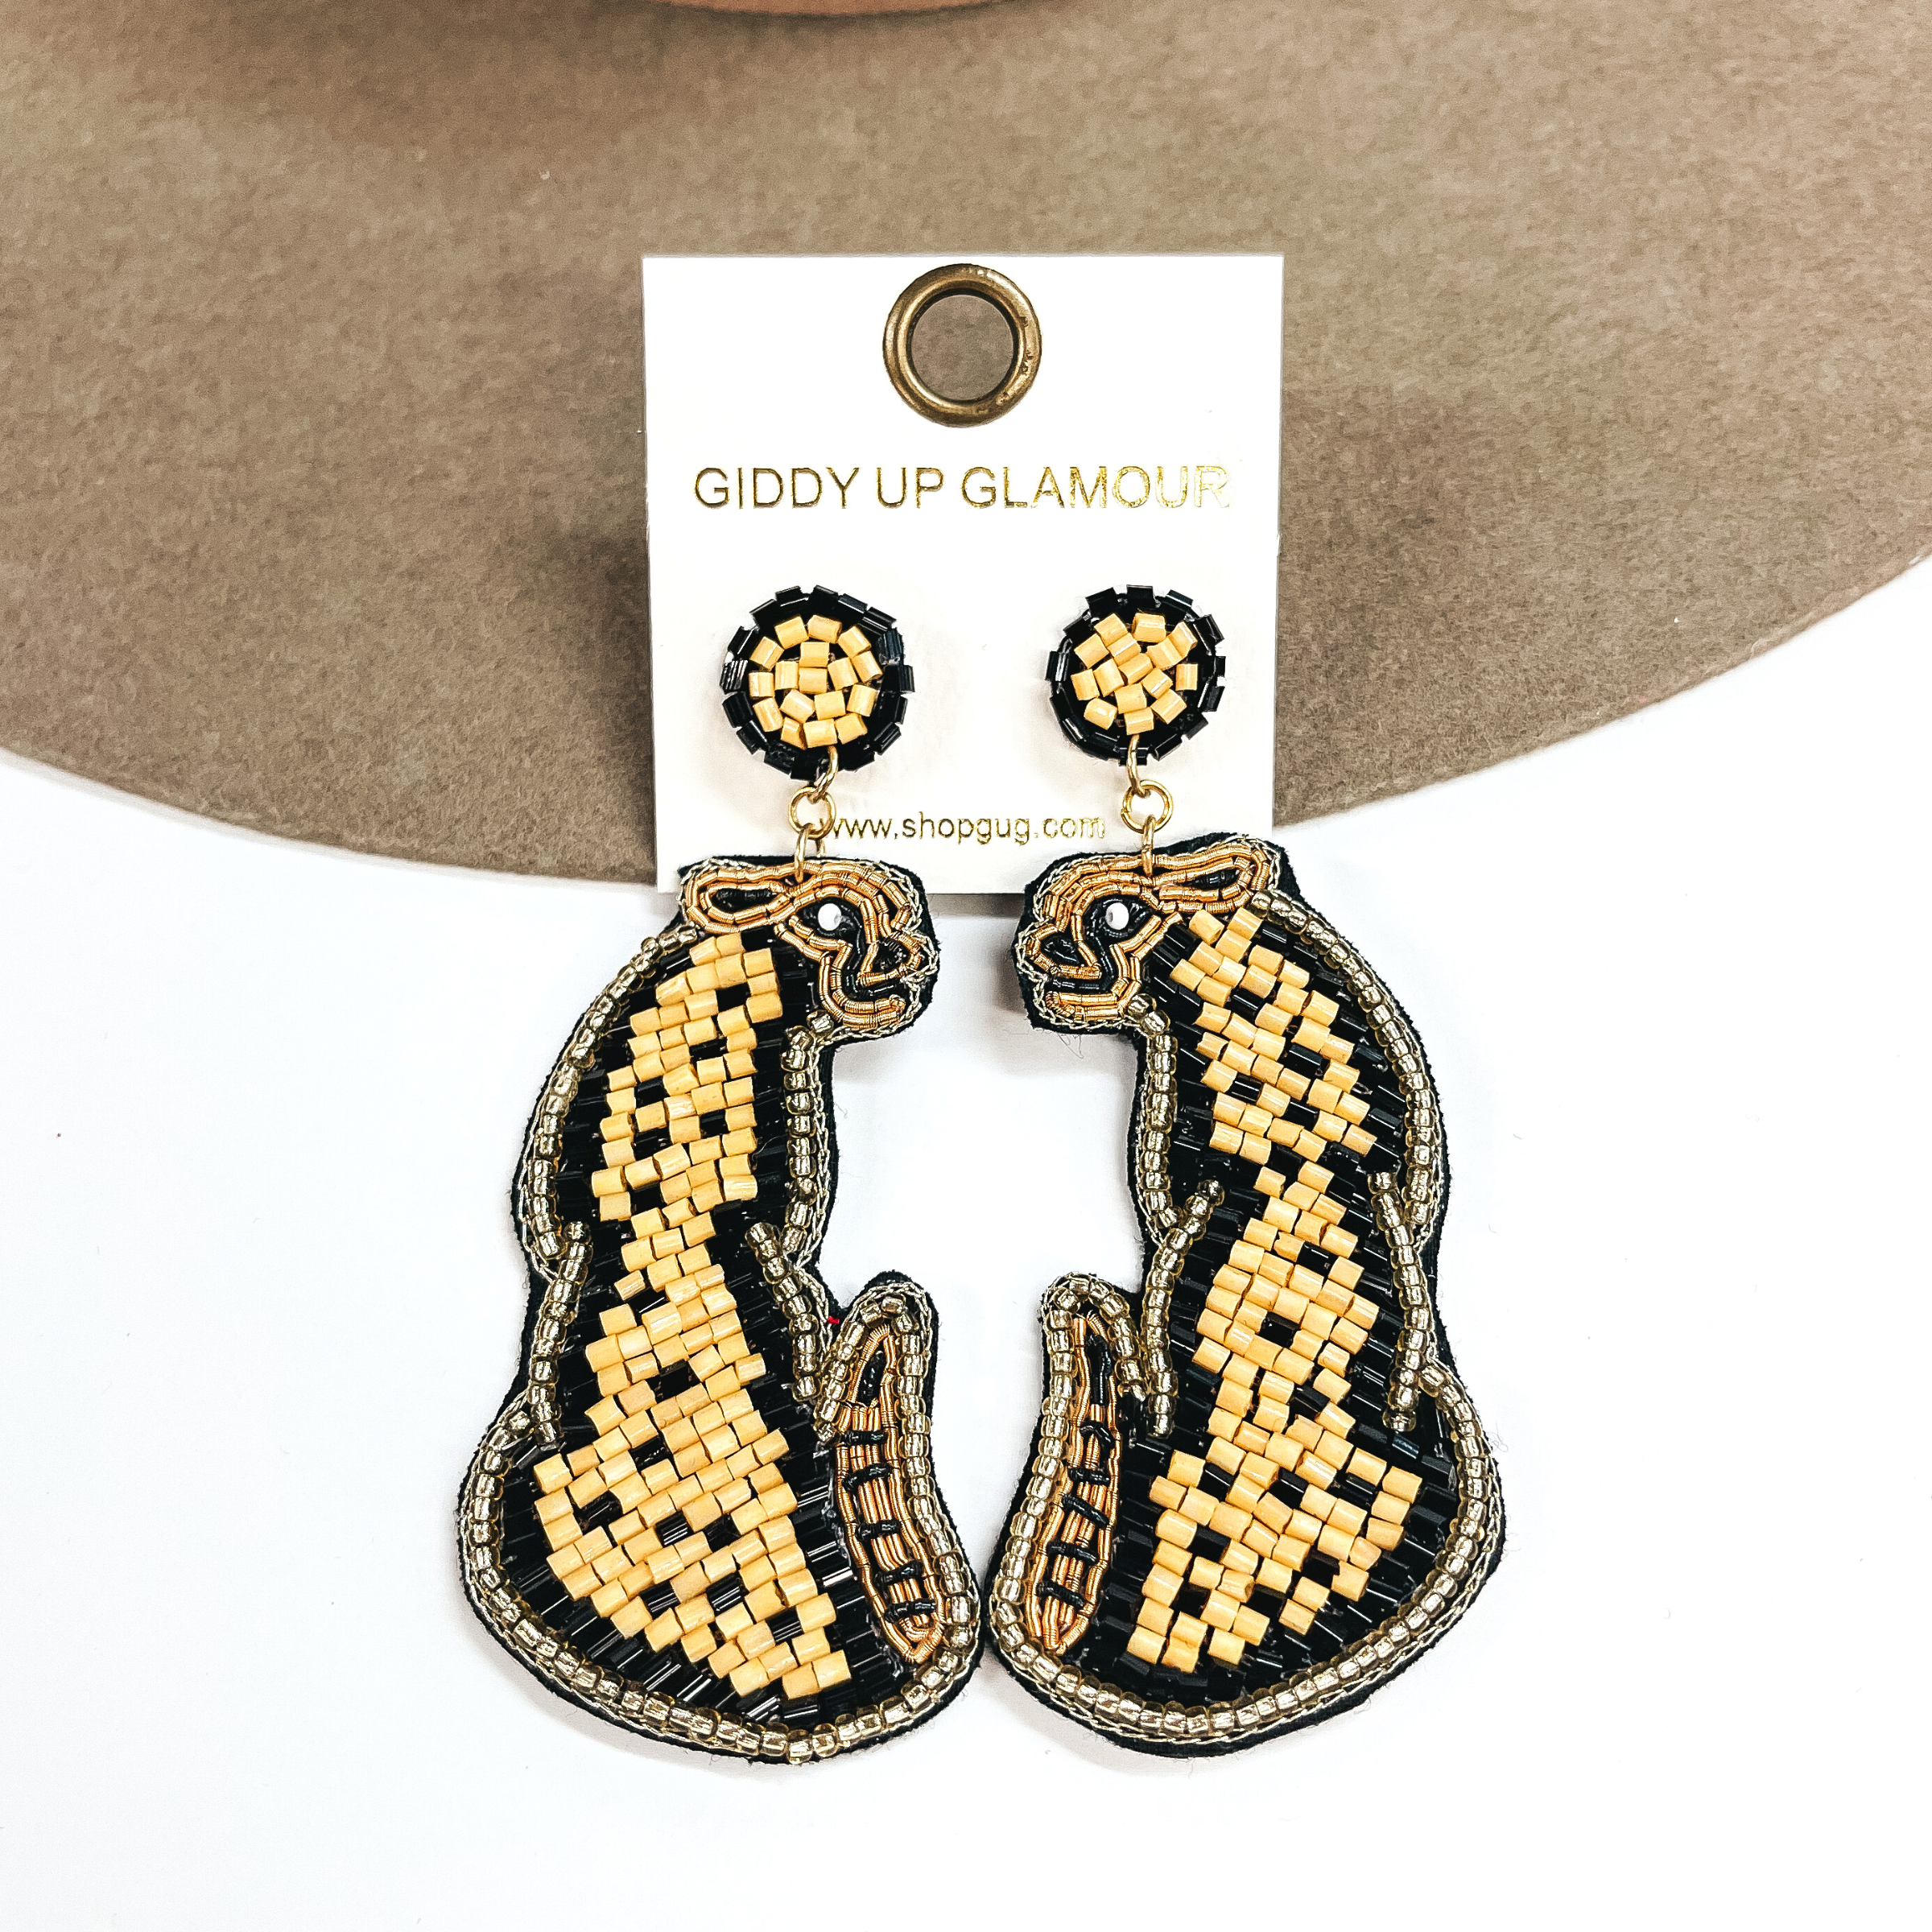 Leopard Beaded Earrings in Black and Tan - Giddy Up Glamour Boutique